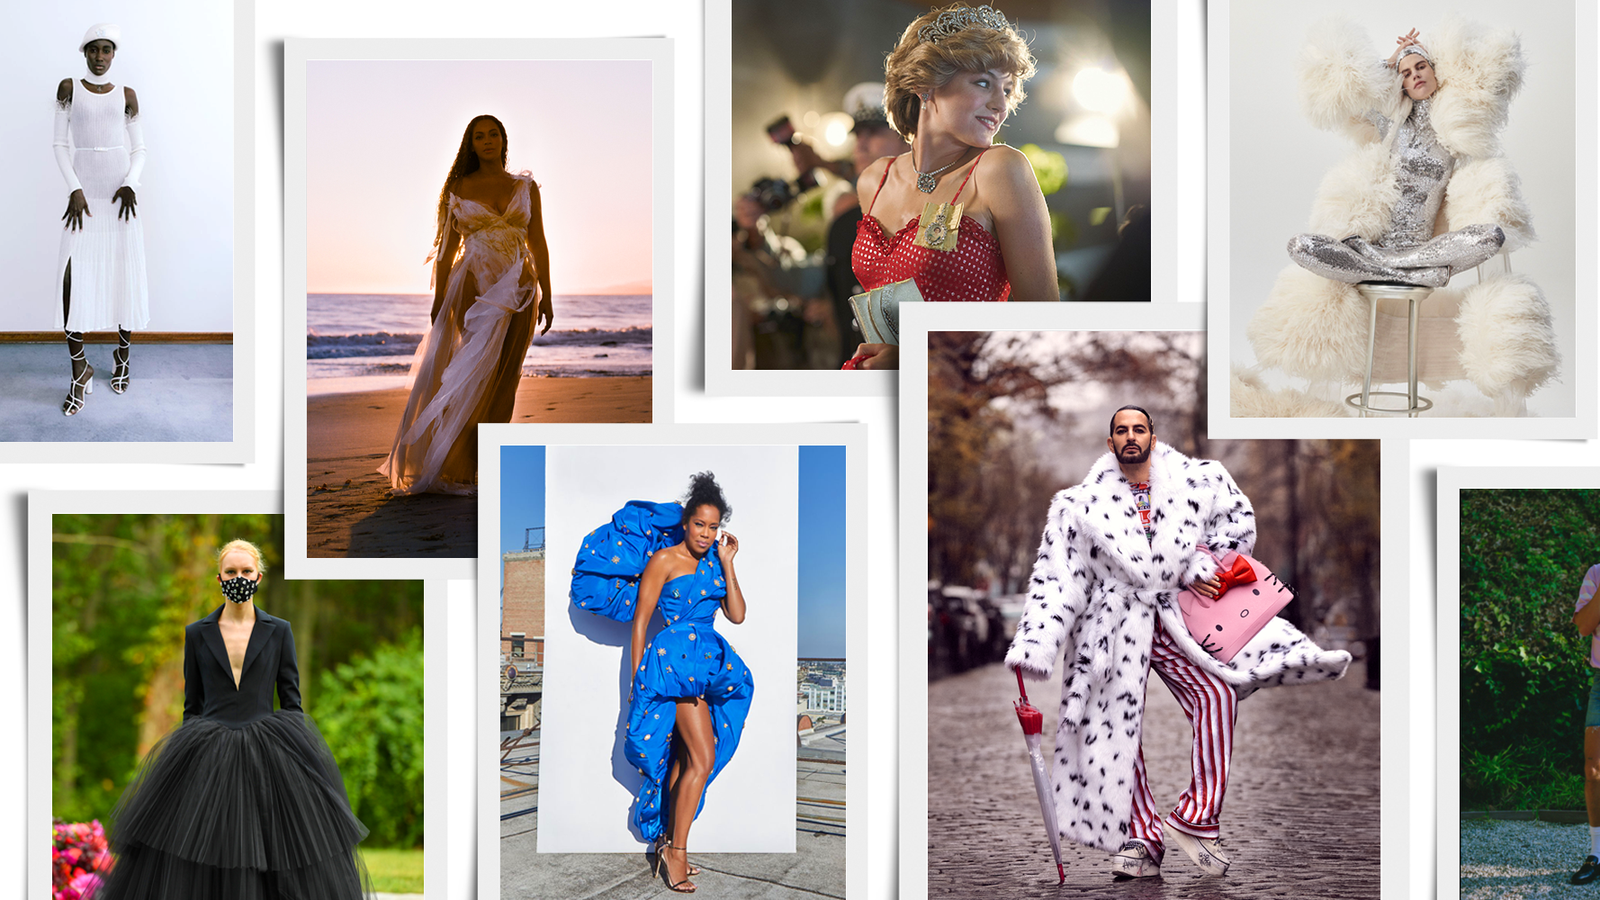 The 20 Top Fashion Moments of 2020